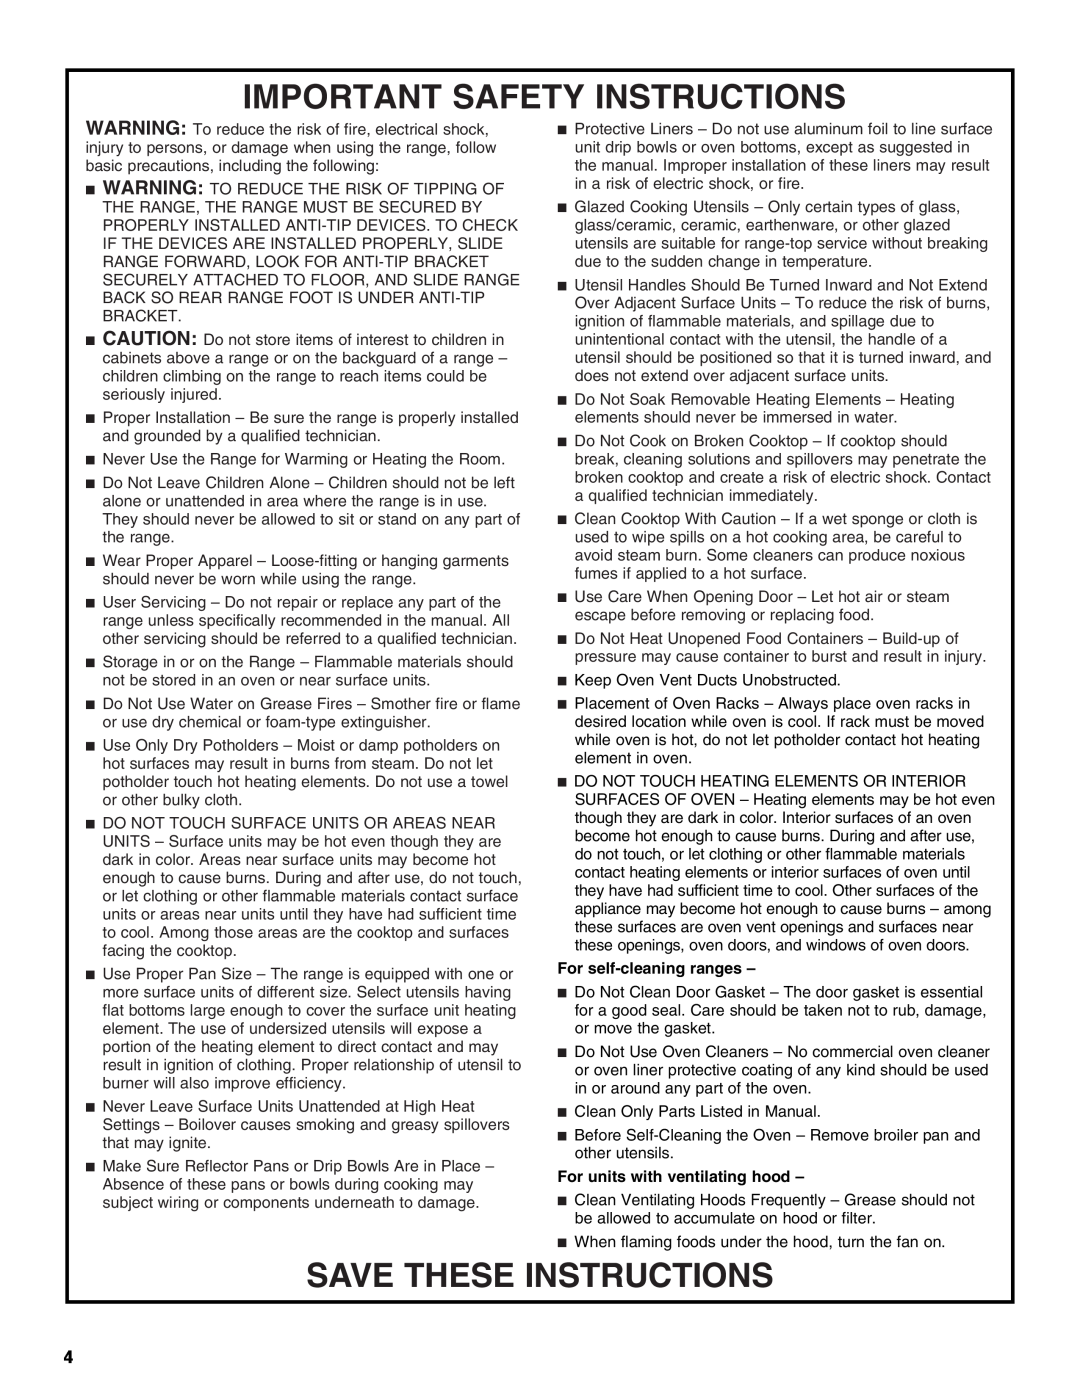 Whirlpool YIES366RS1 manual Important Safety Instructions, Save These Instructions, For self-cleaningranges 